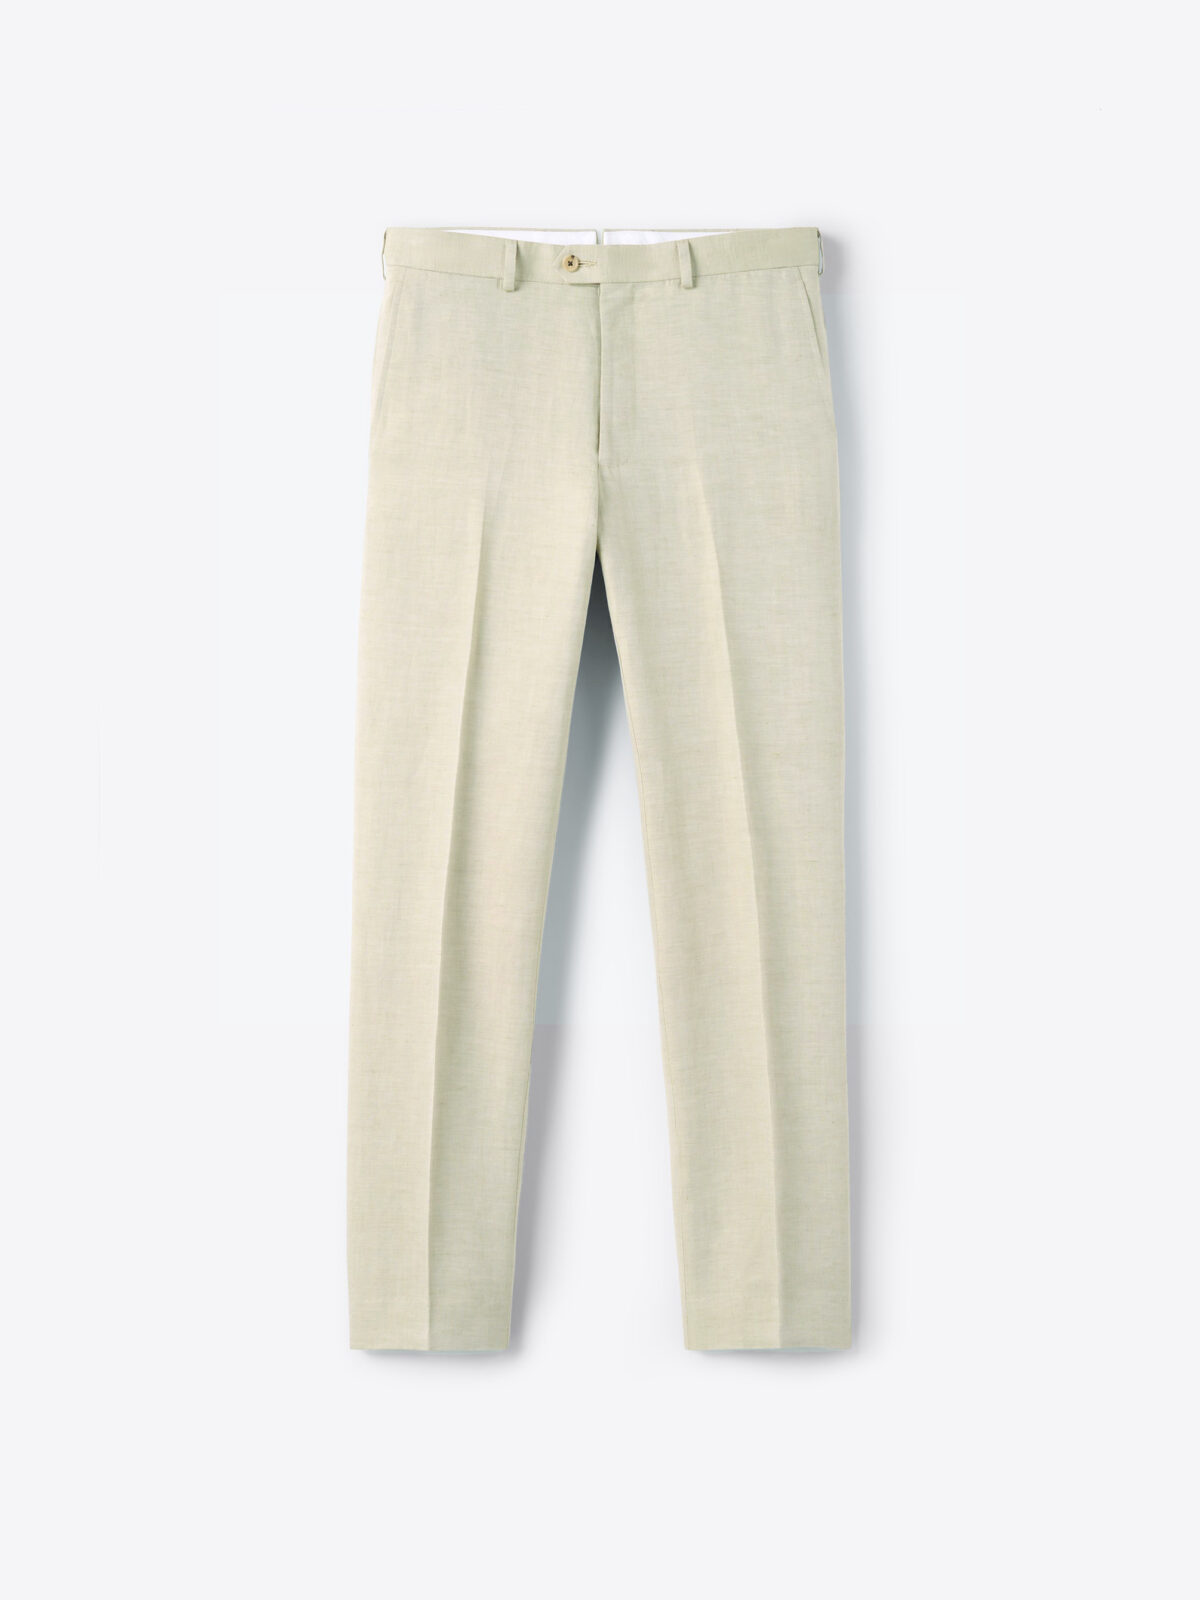 Pistachio Cotton and Linen Dress Pant - Custom Fit Tailored Clothing